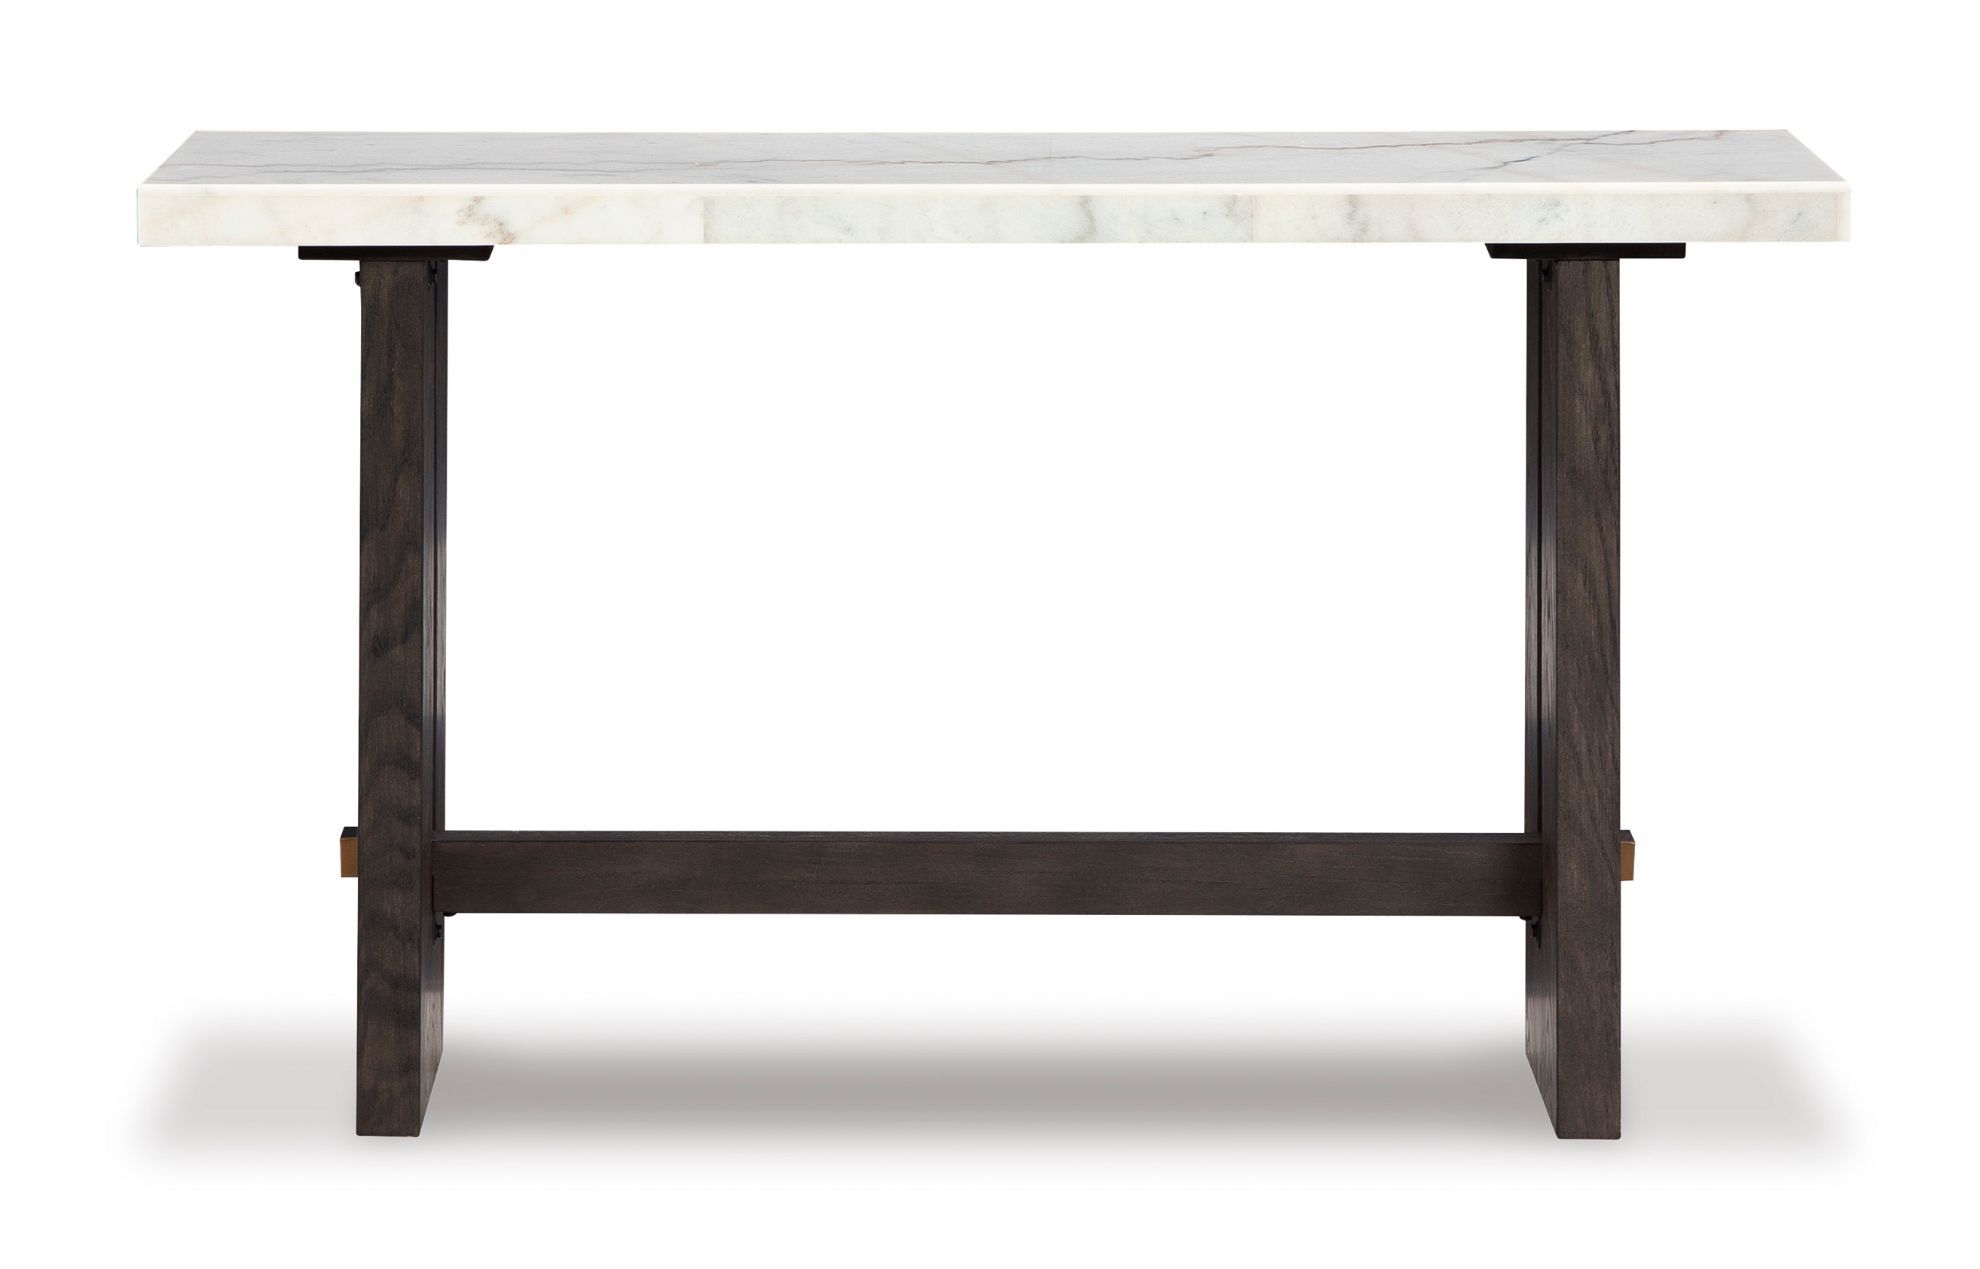 Picture of Burkhaus Sofa Table